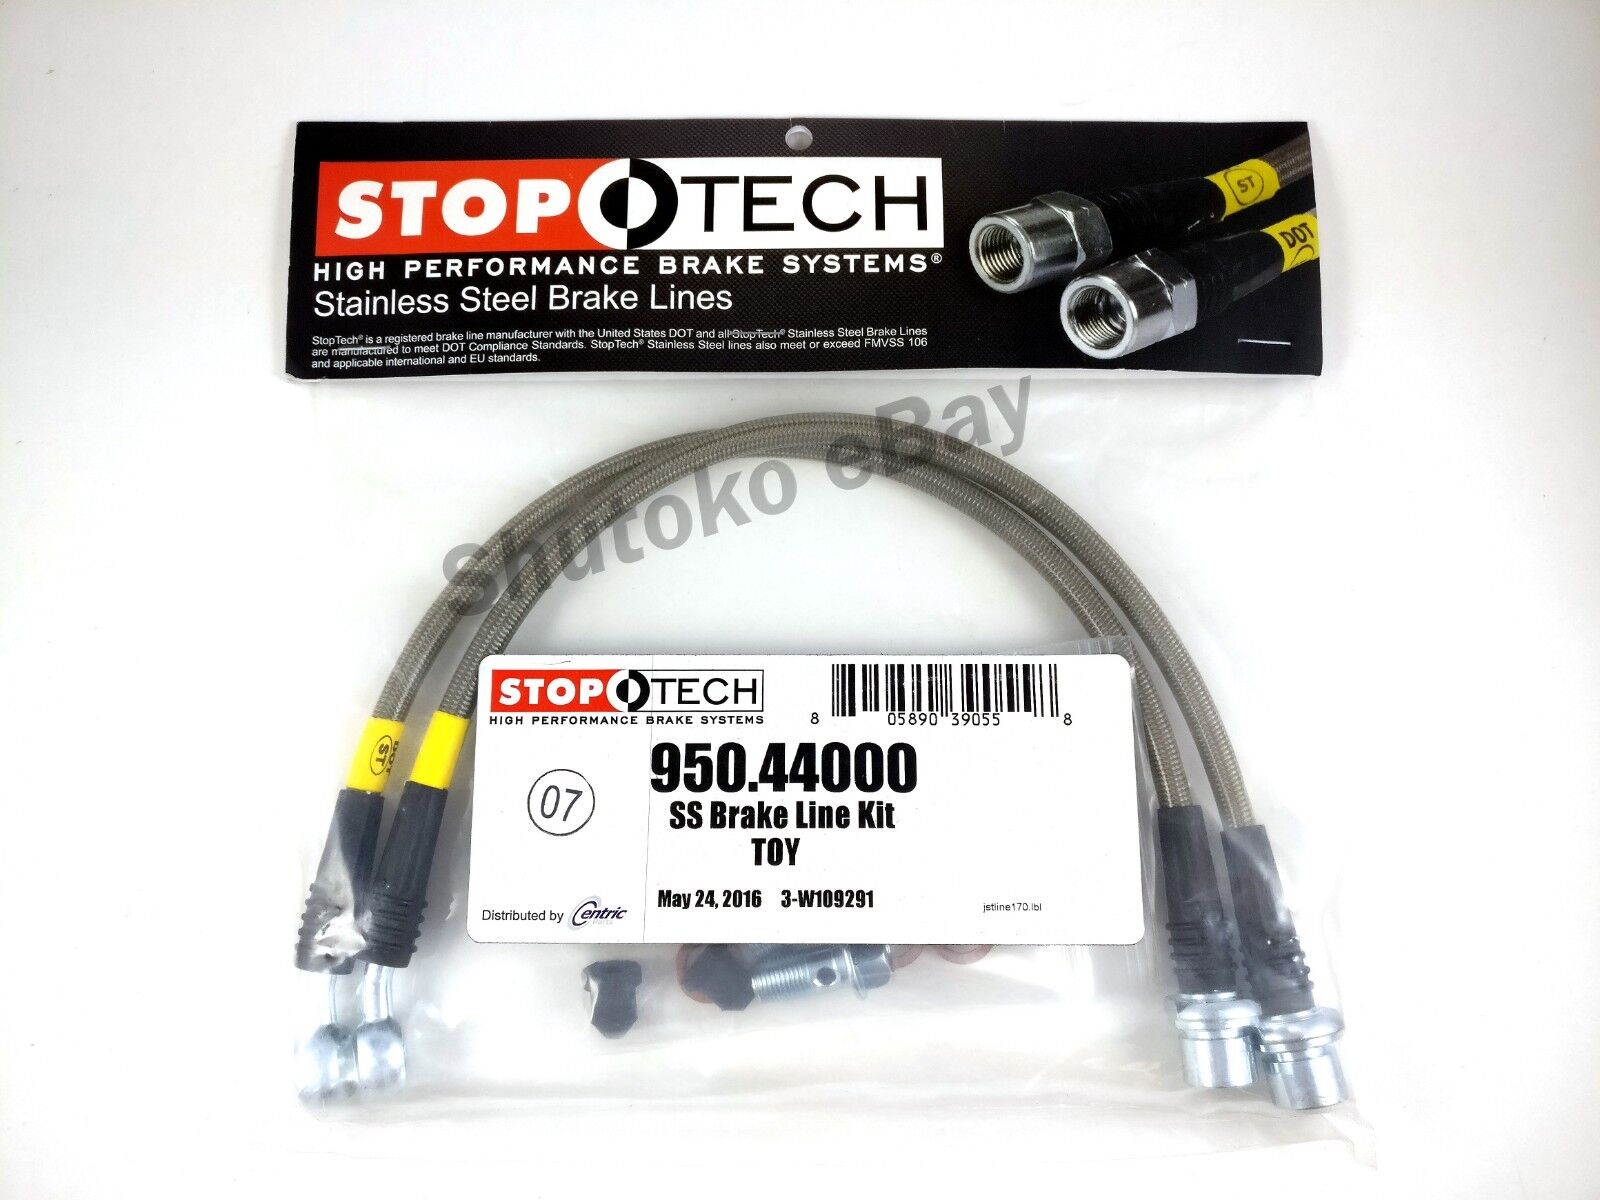 STOPTECH STAINLESS STEEL FRONT BRAKE LINES FOR 01-05 LEXUS IS300 / 02-07 SC430